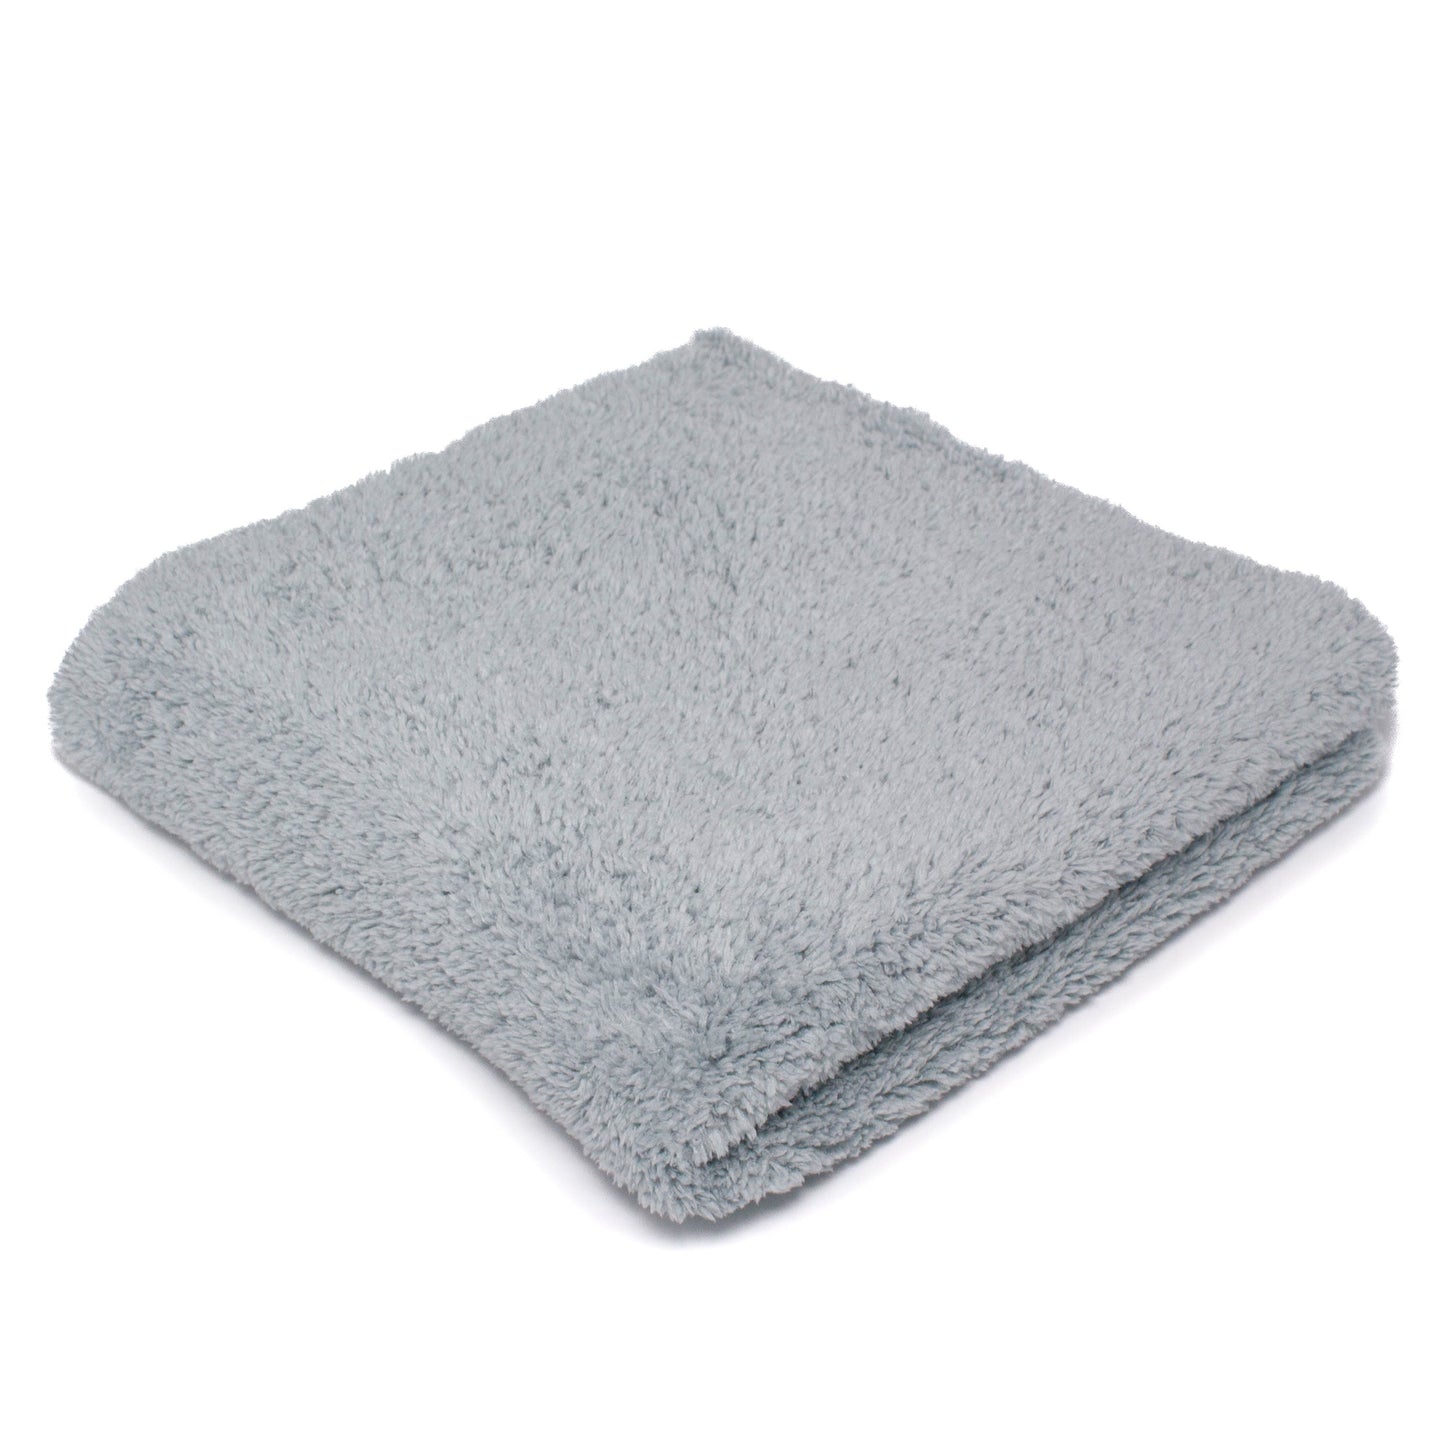 Mammoth Supa Soft Microfibre Cloth for wax buffing.